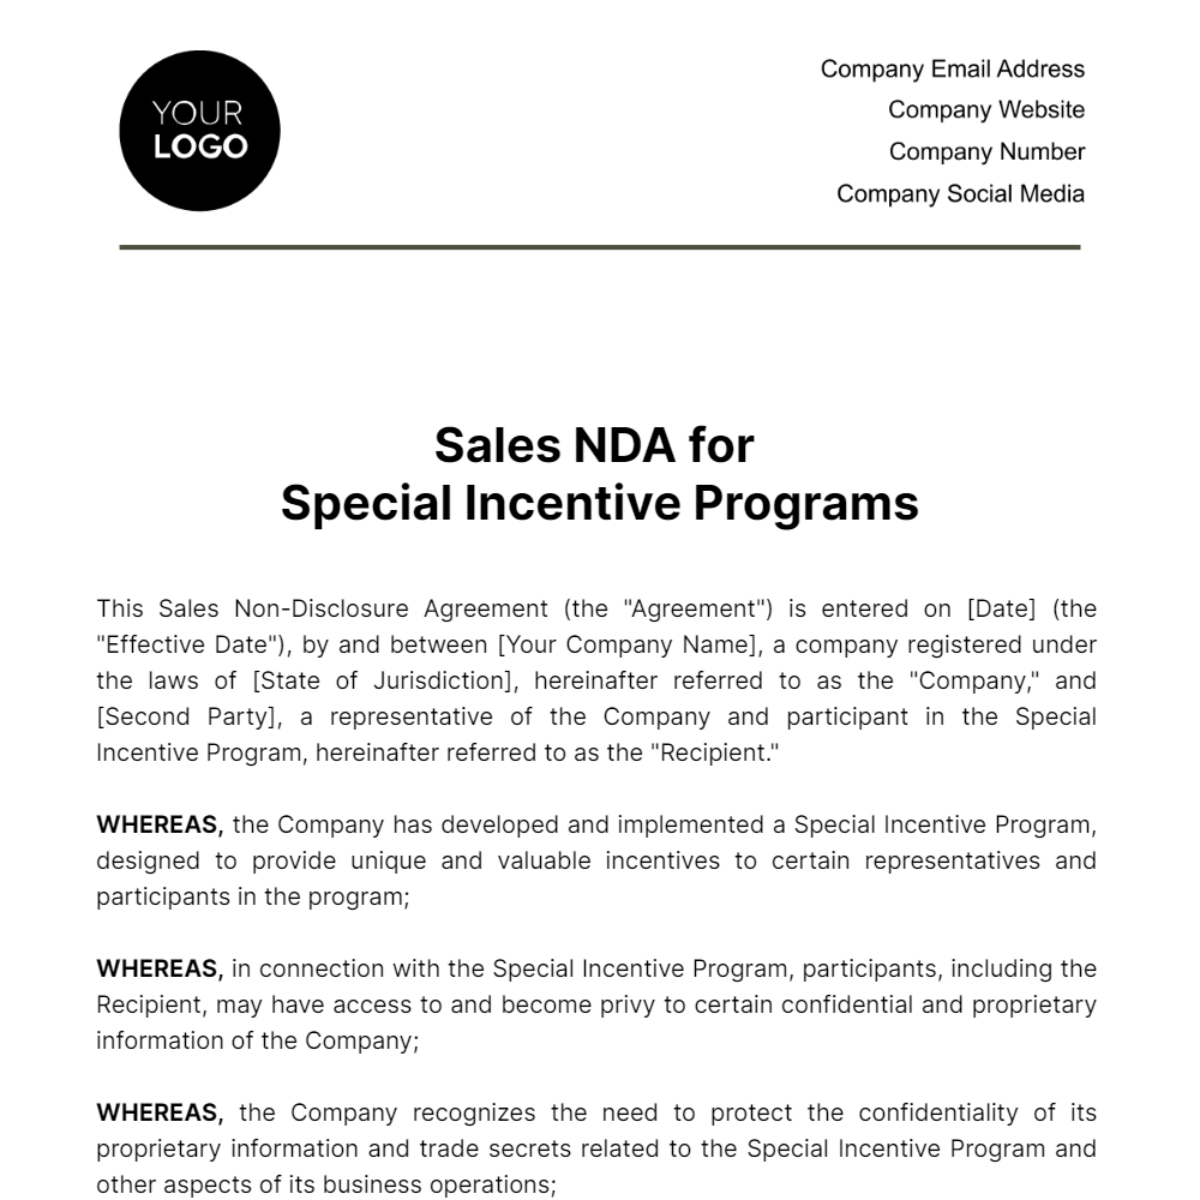 Sales NDA for Special Incentive Programs Template